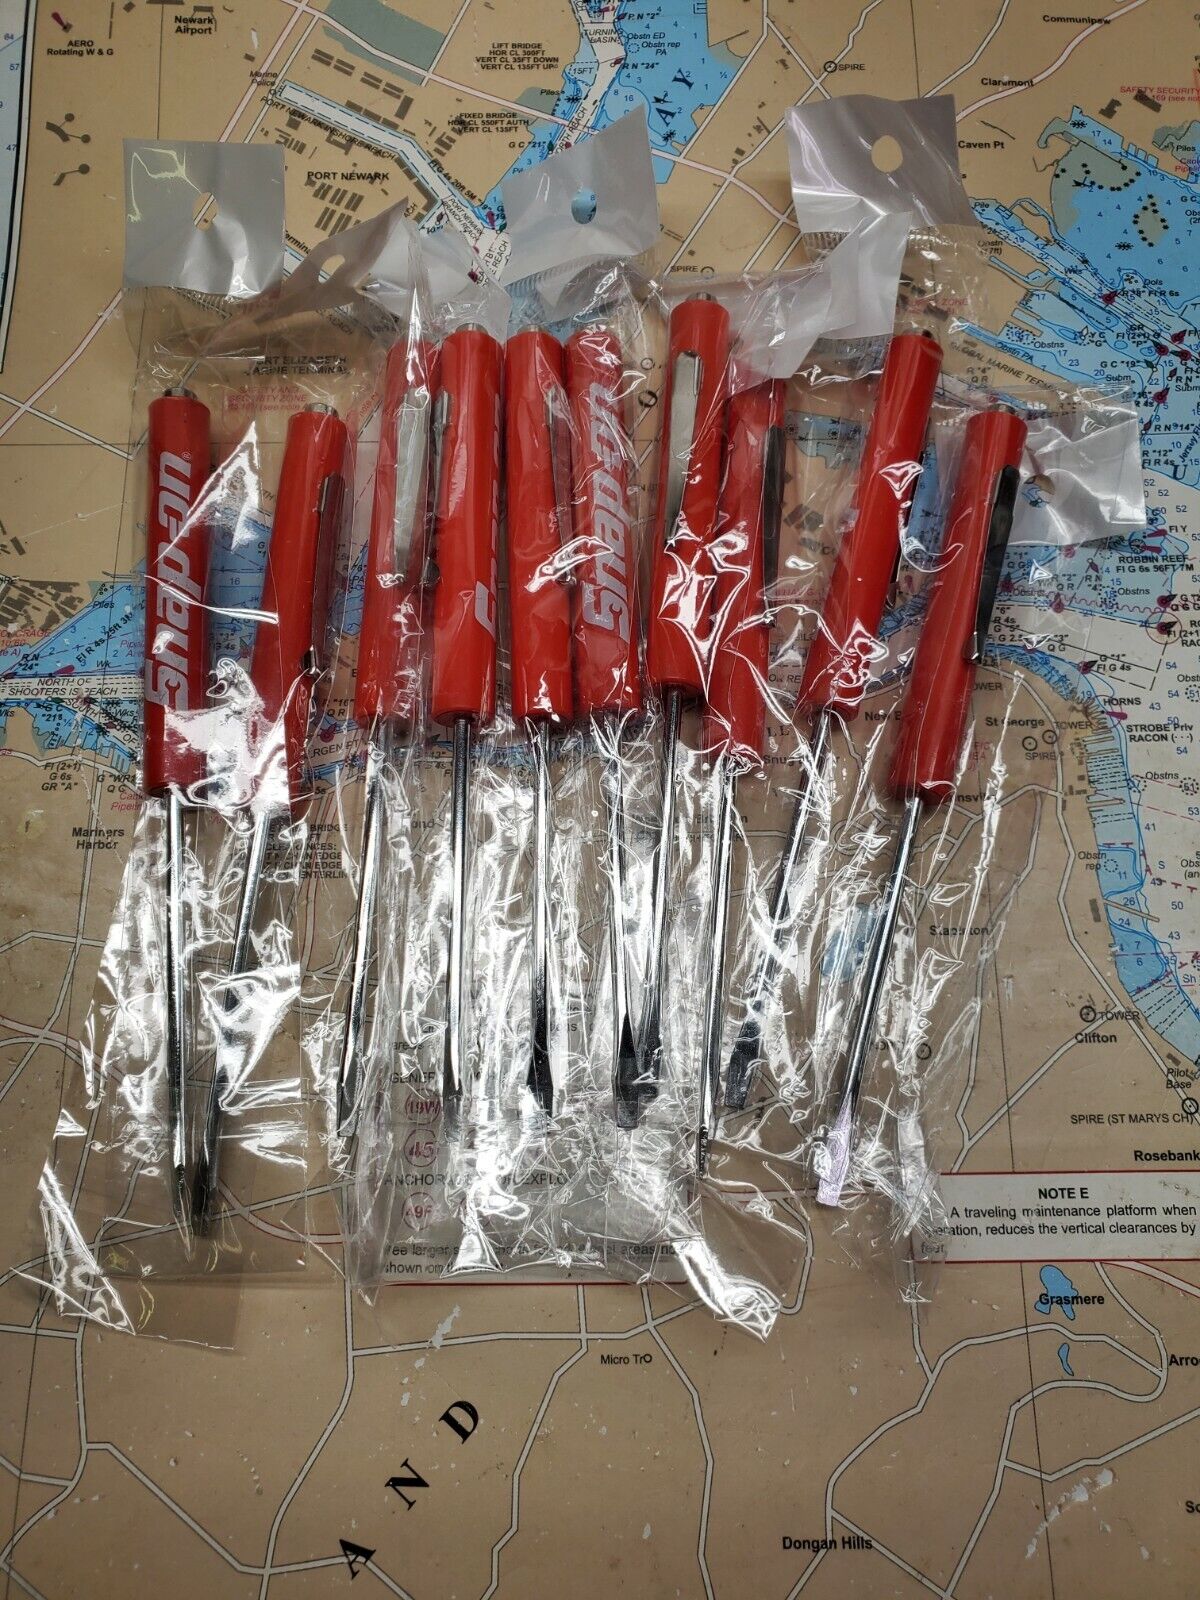 SNAP-ON TOOL POCKET SCREWDRIVER, 10 SCREW DRIVERS IN RED, BRAND NEW MAGNETIC END